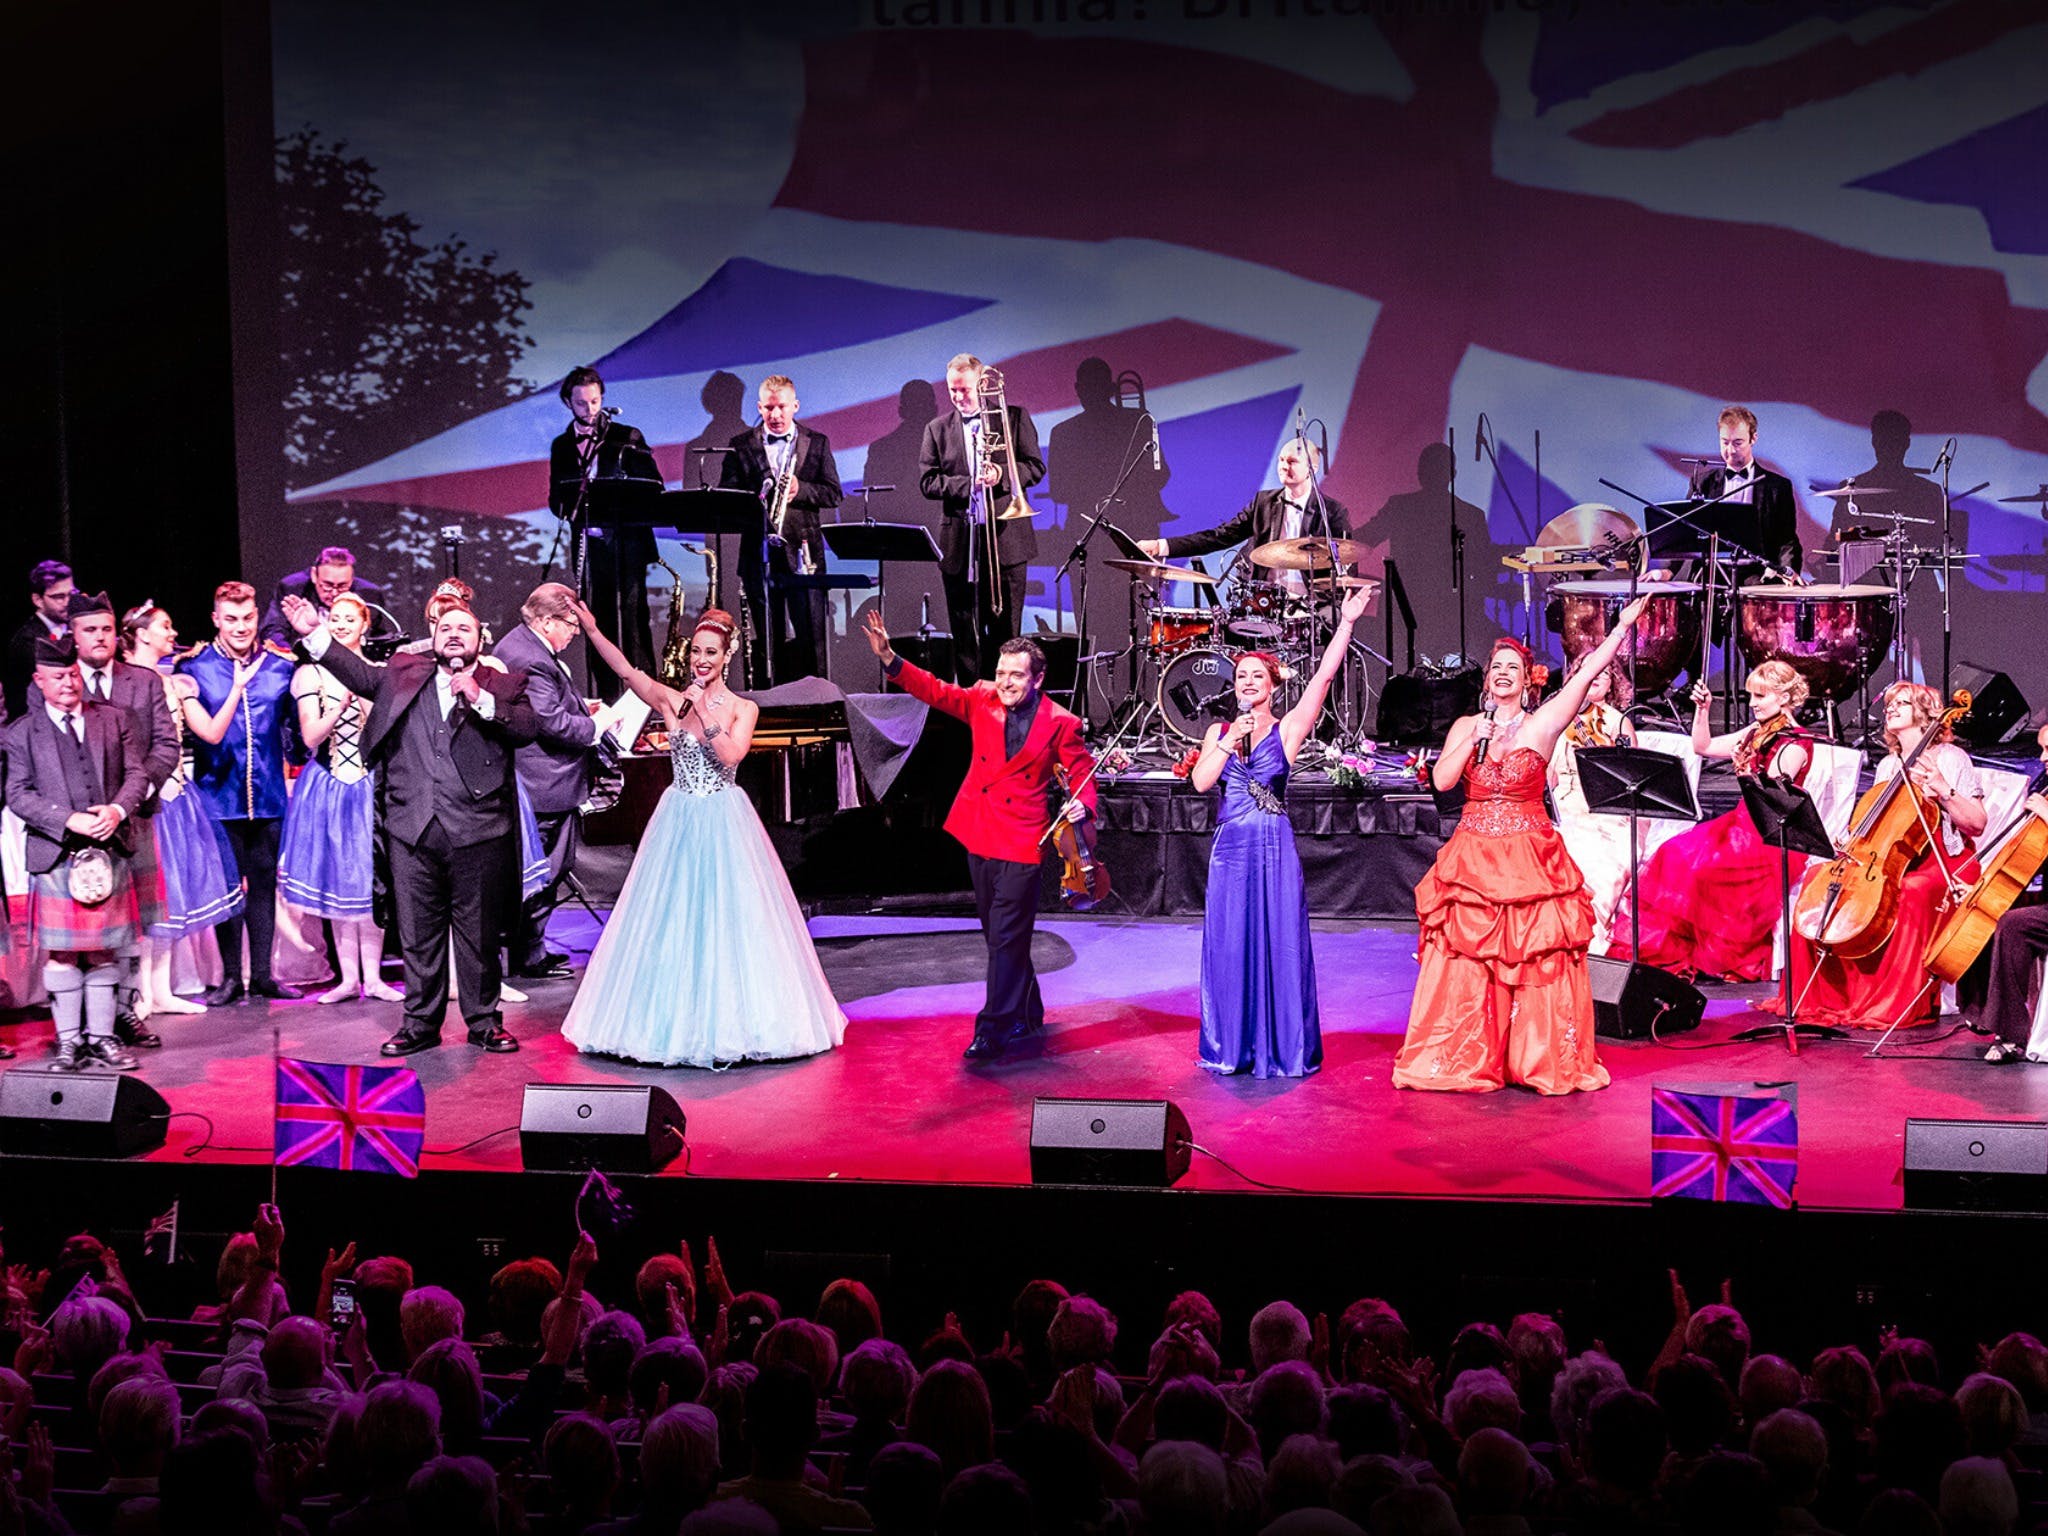 An Afternoon at the Proms - A Musical Spectacular - Accommodation Bookings